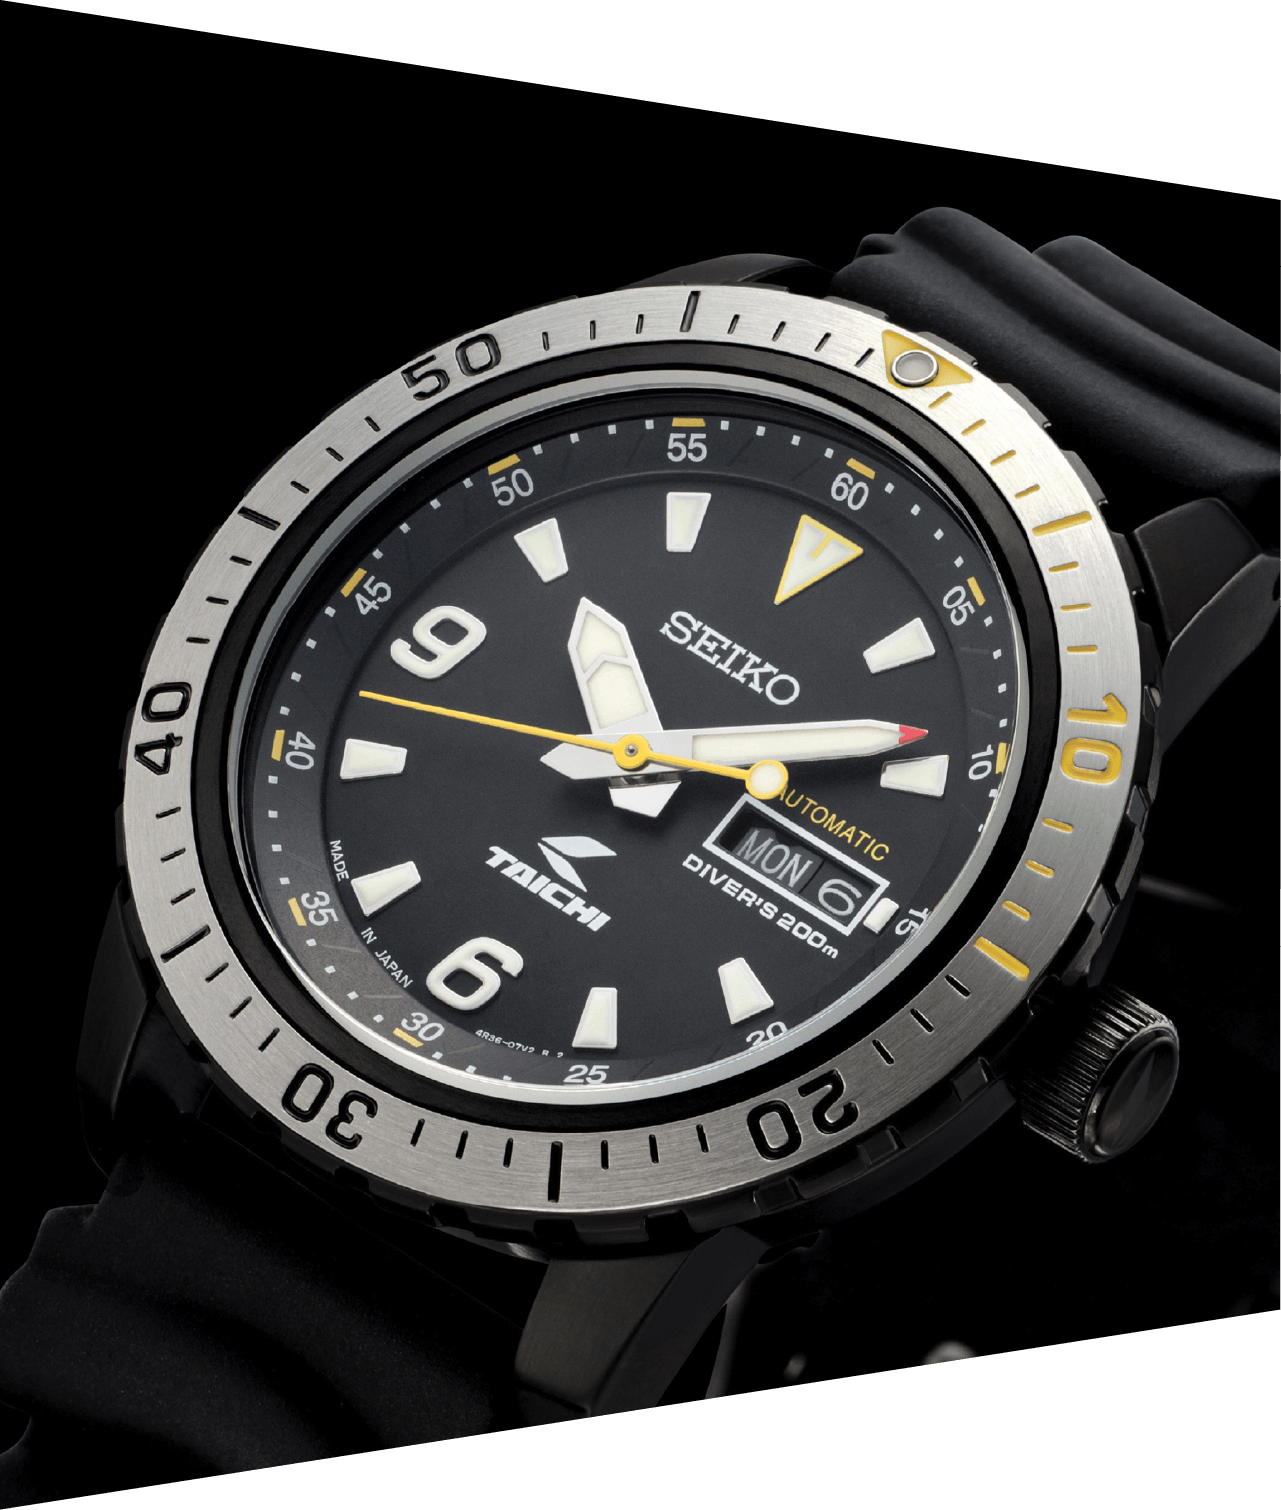 A mechanical diver’s watch that won’t lose its quintessential value over time